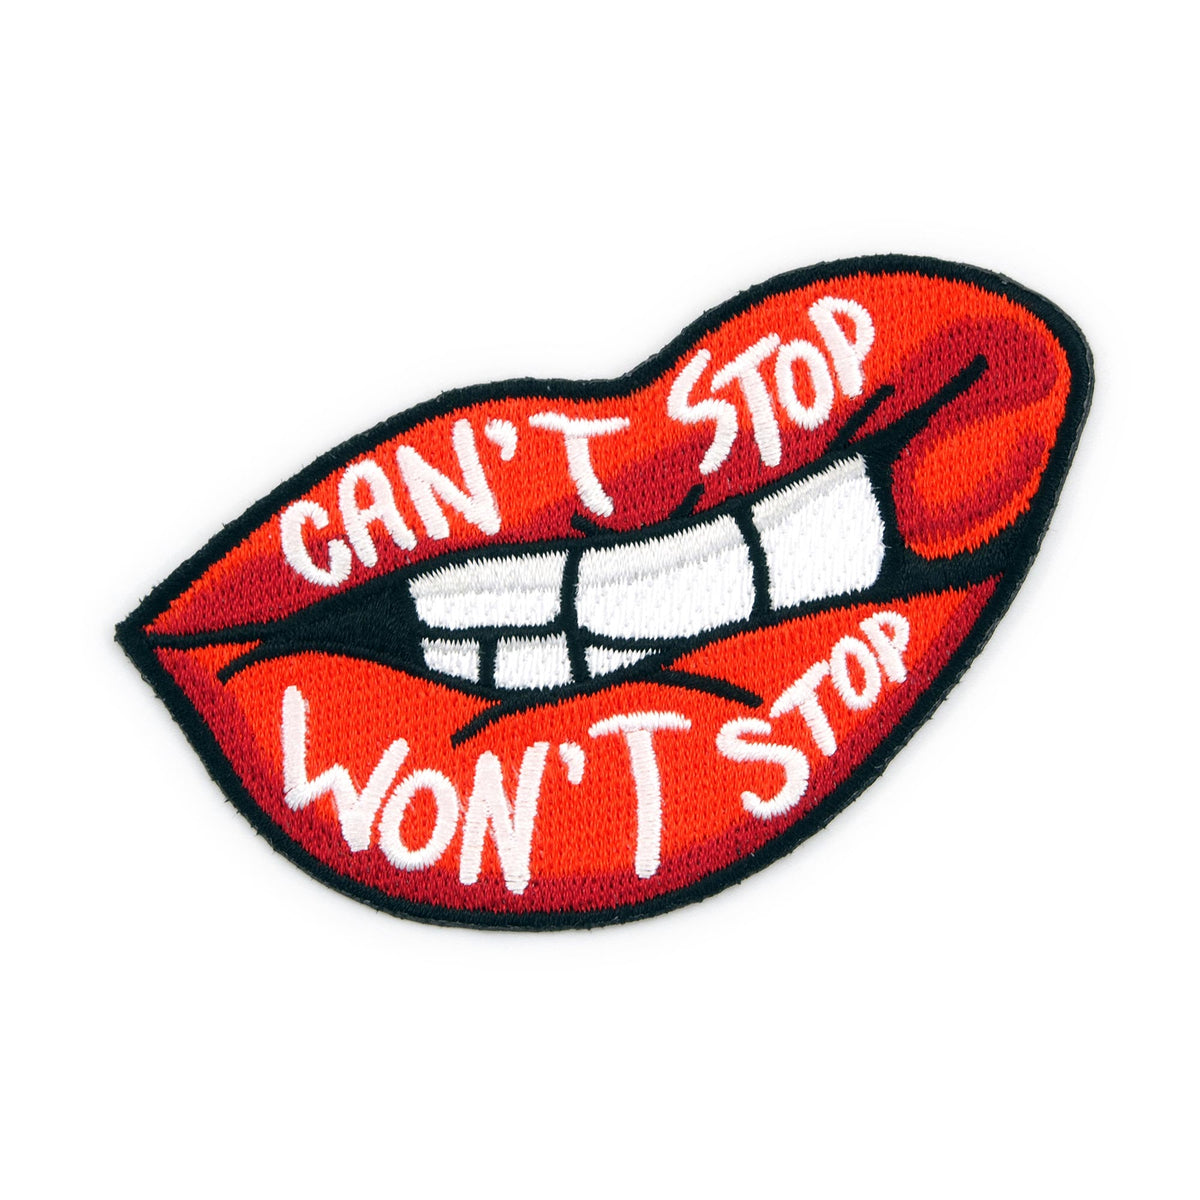 Can't Stop Won't Stop Lips embroidered iron-on patch